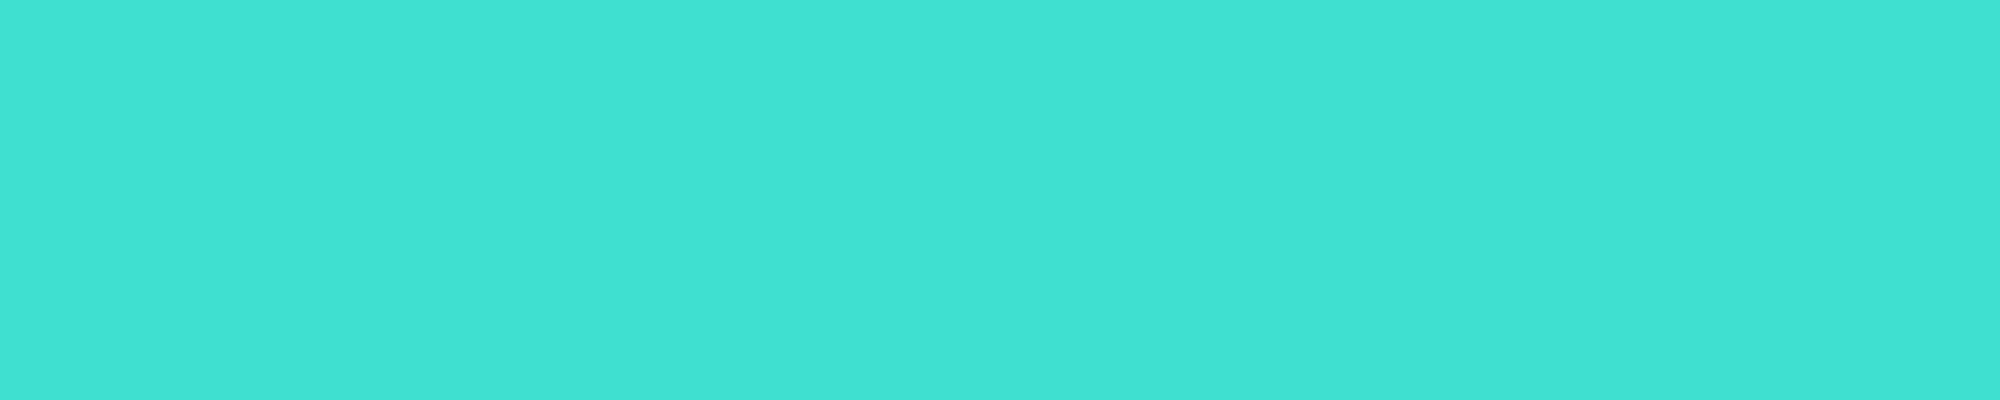 turquoise banner